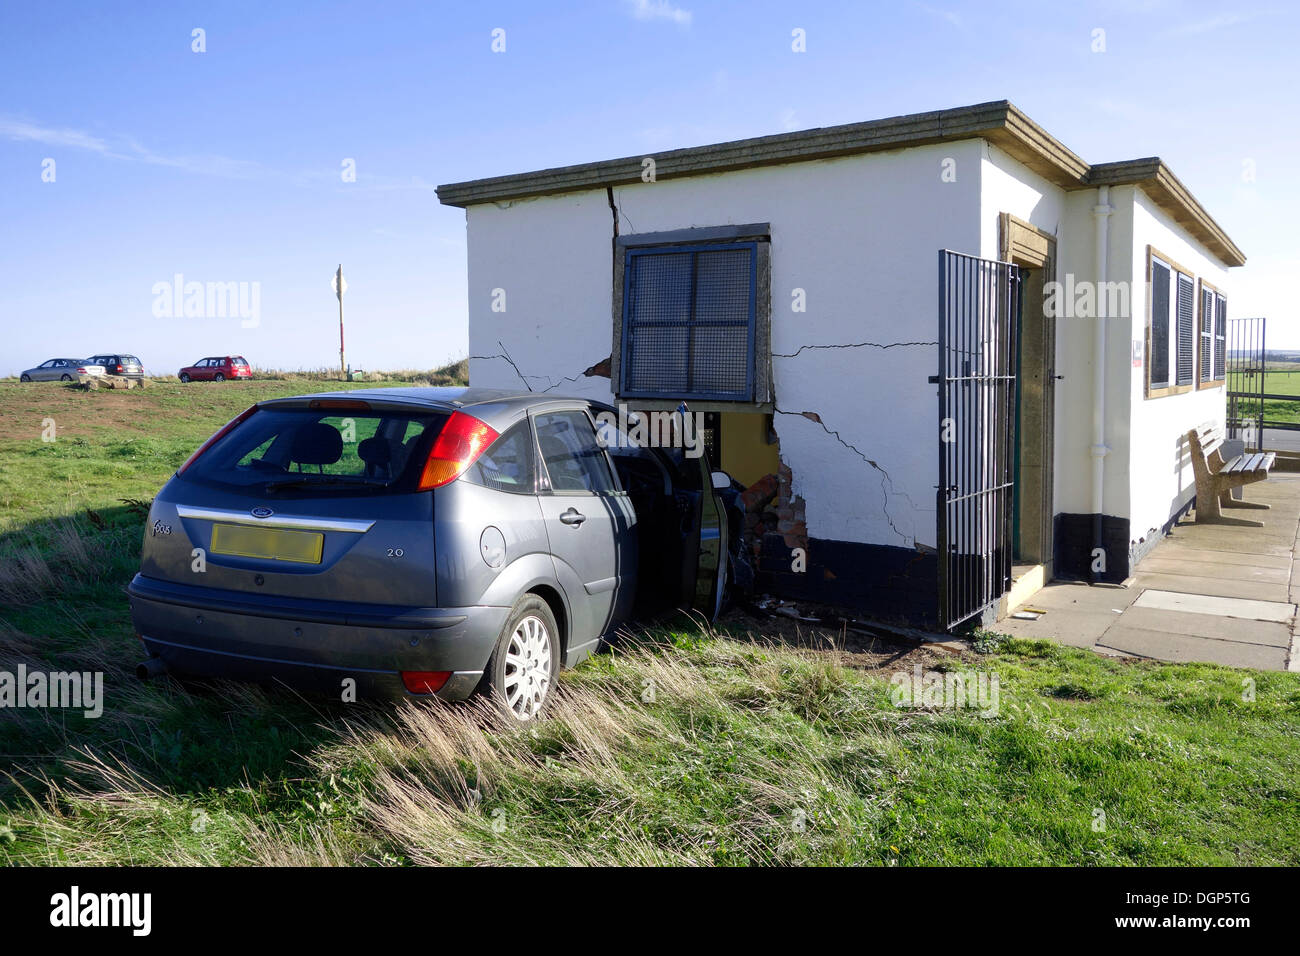 Redcar and Cleveland, UK . 24th Oct, 2013. A  woman driver has driven her car off the road and collided with Public Toilet block severely damaging the car and the Building. The accident happed about 11.30 a.m. 24/10/2013 in bright clear weather Credit:  Peter Jordan NE/Alamy Live News Stock Photo